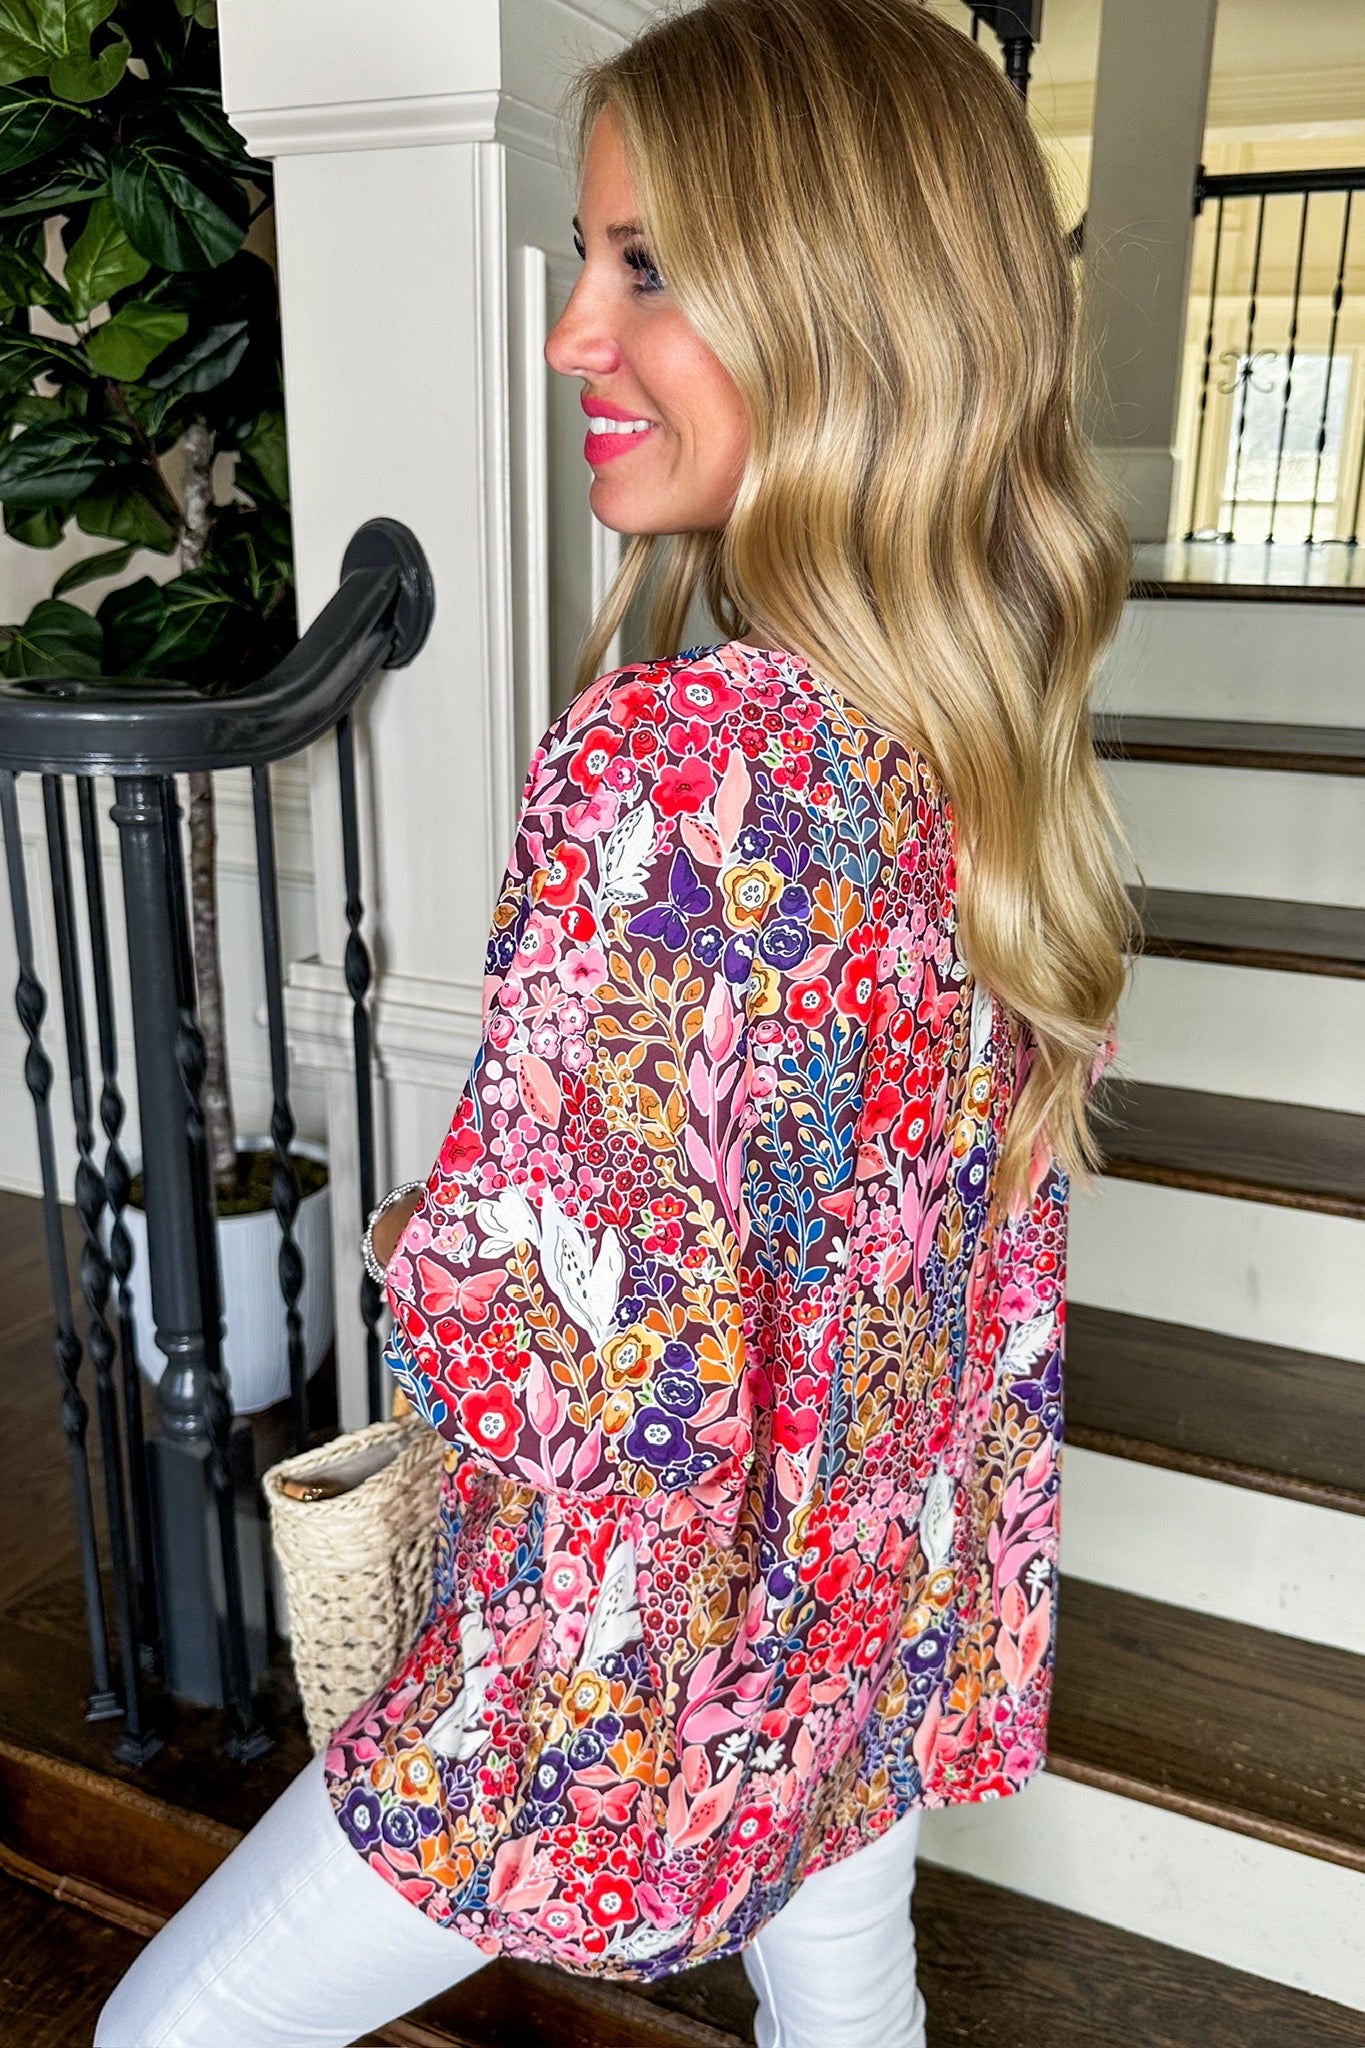 The Monica Top in Fun Floral